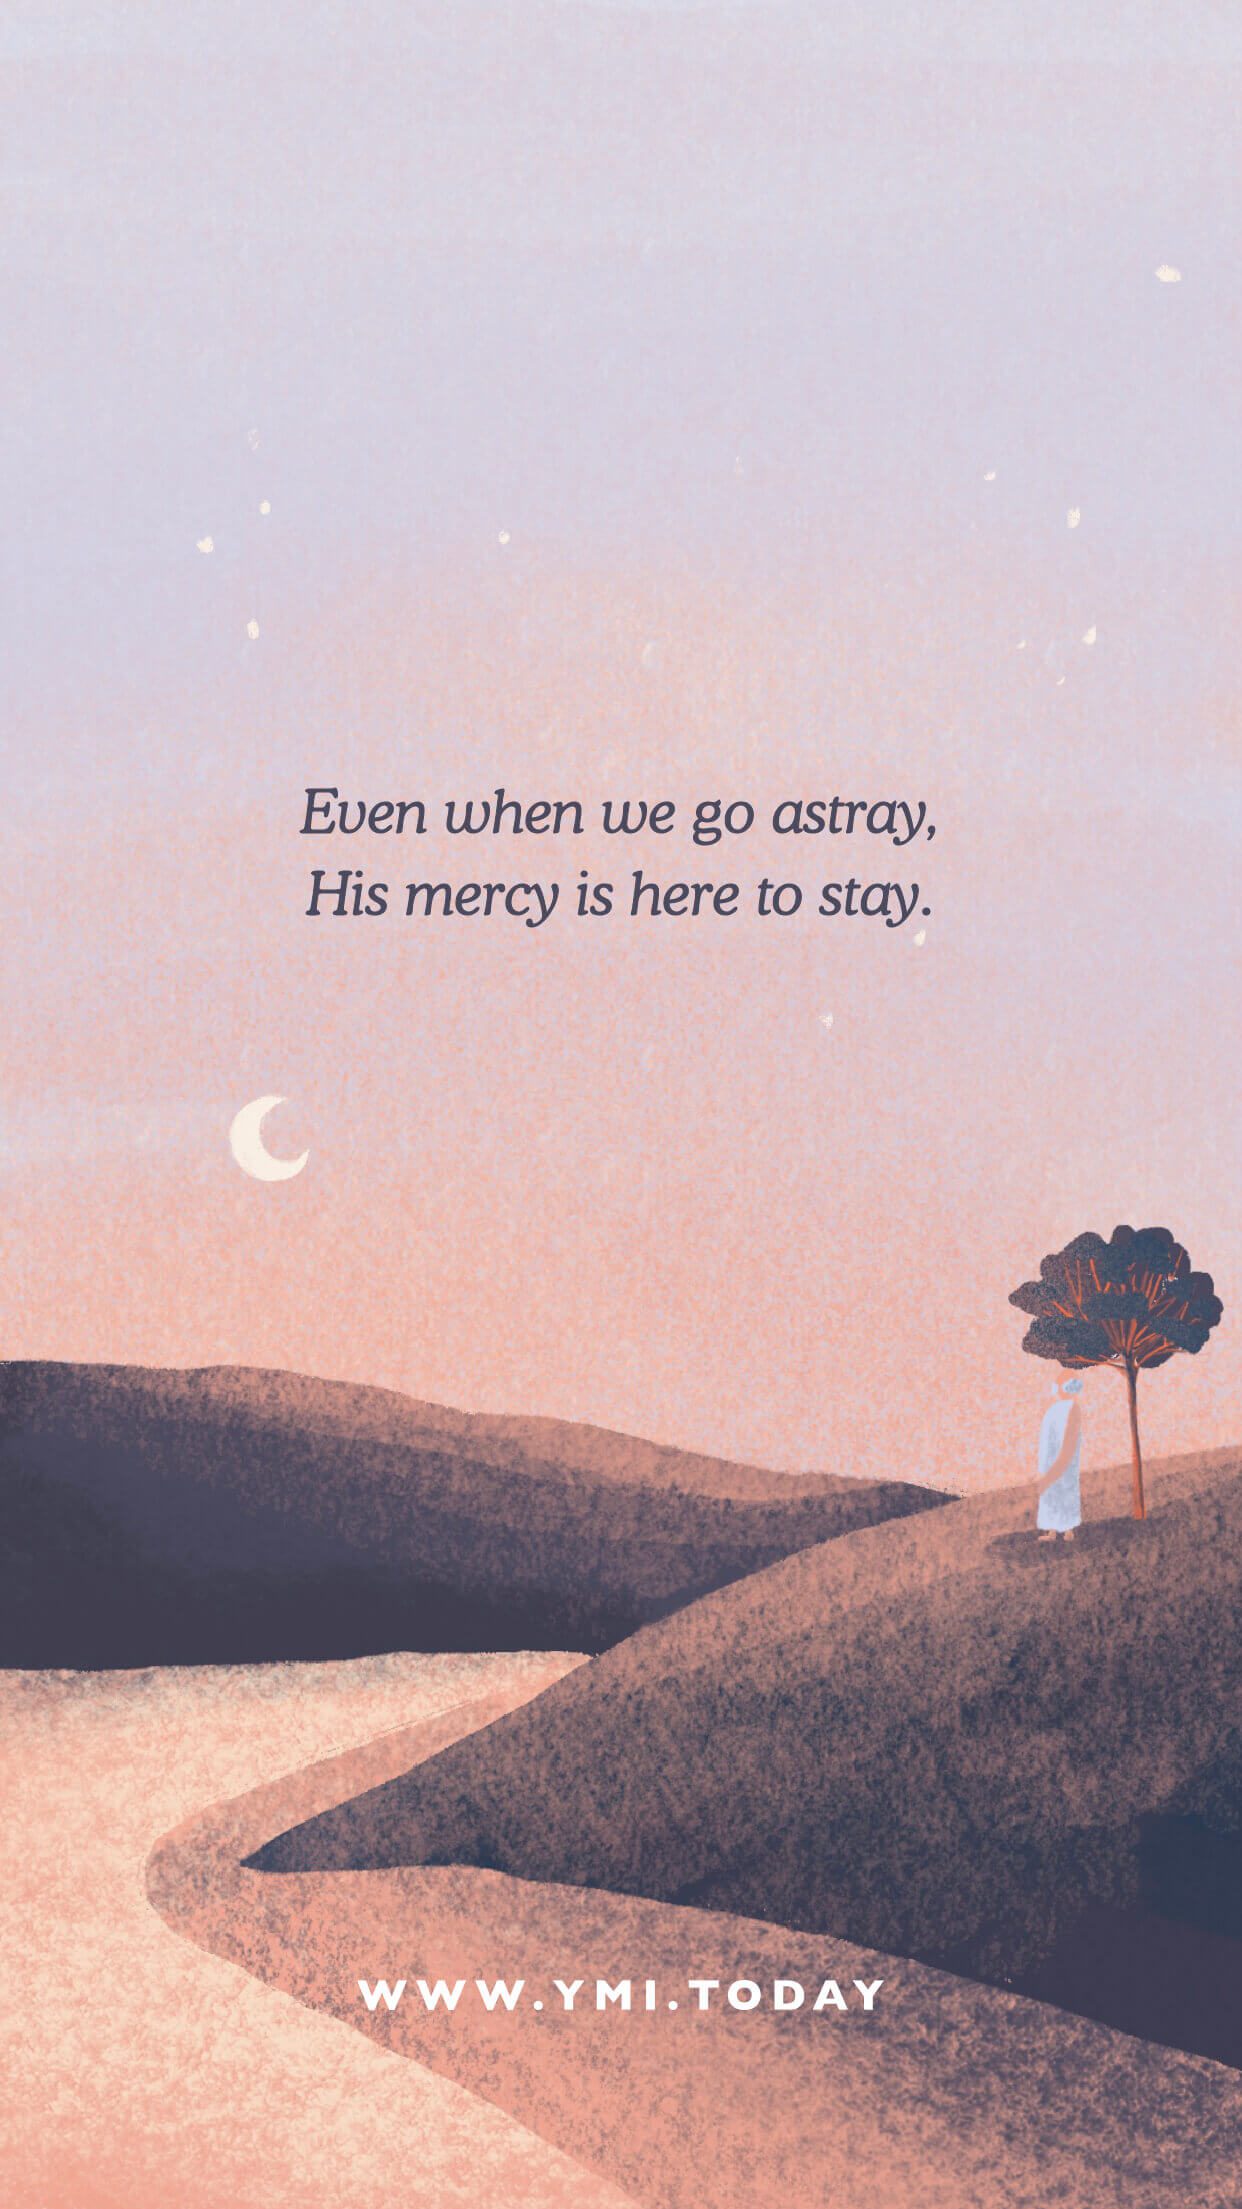 Even when we go astray. His mercy is here to stay.